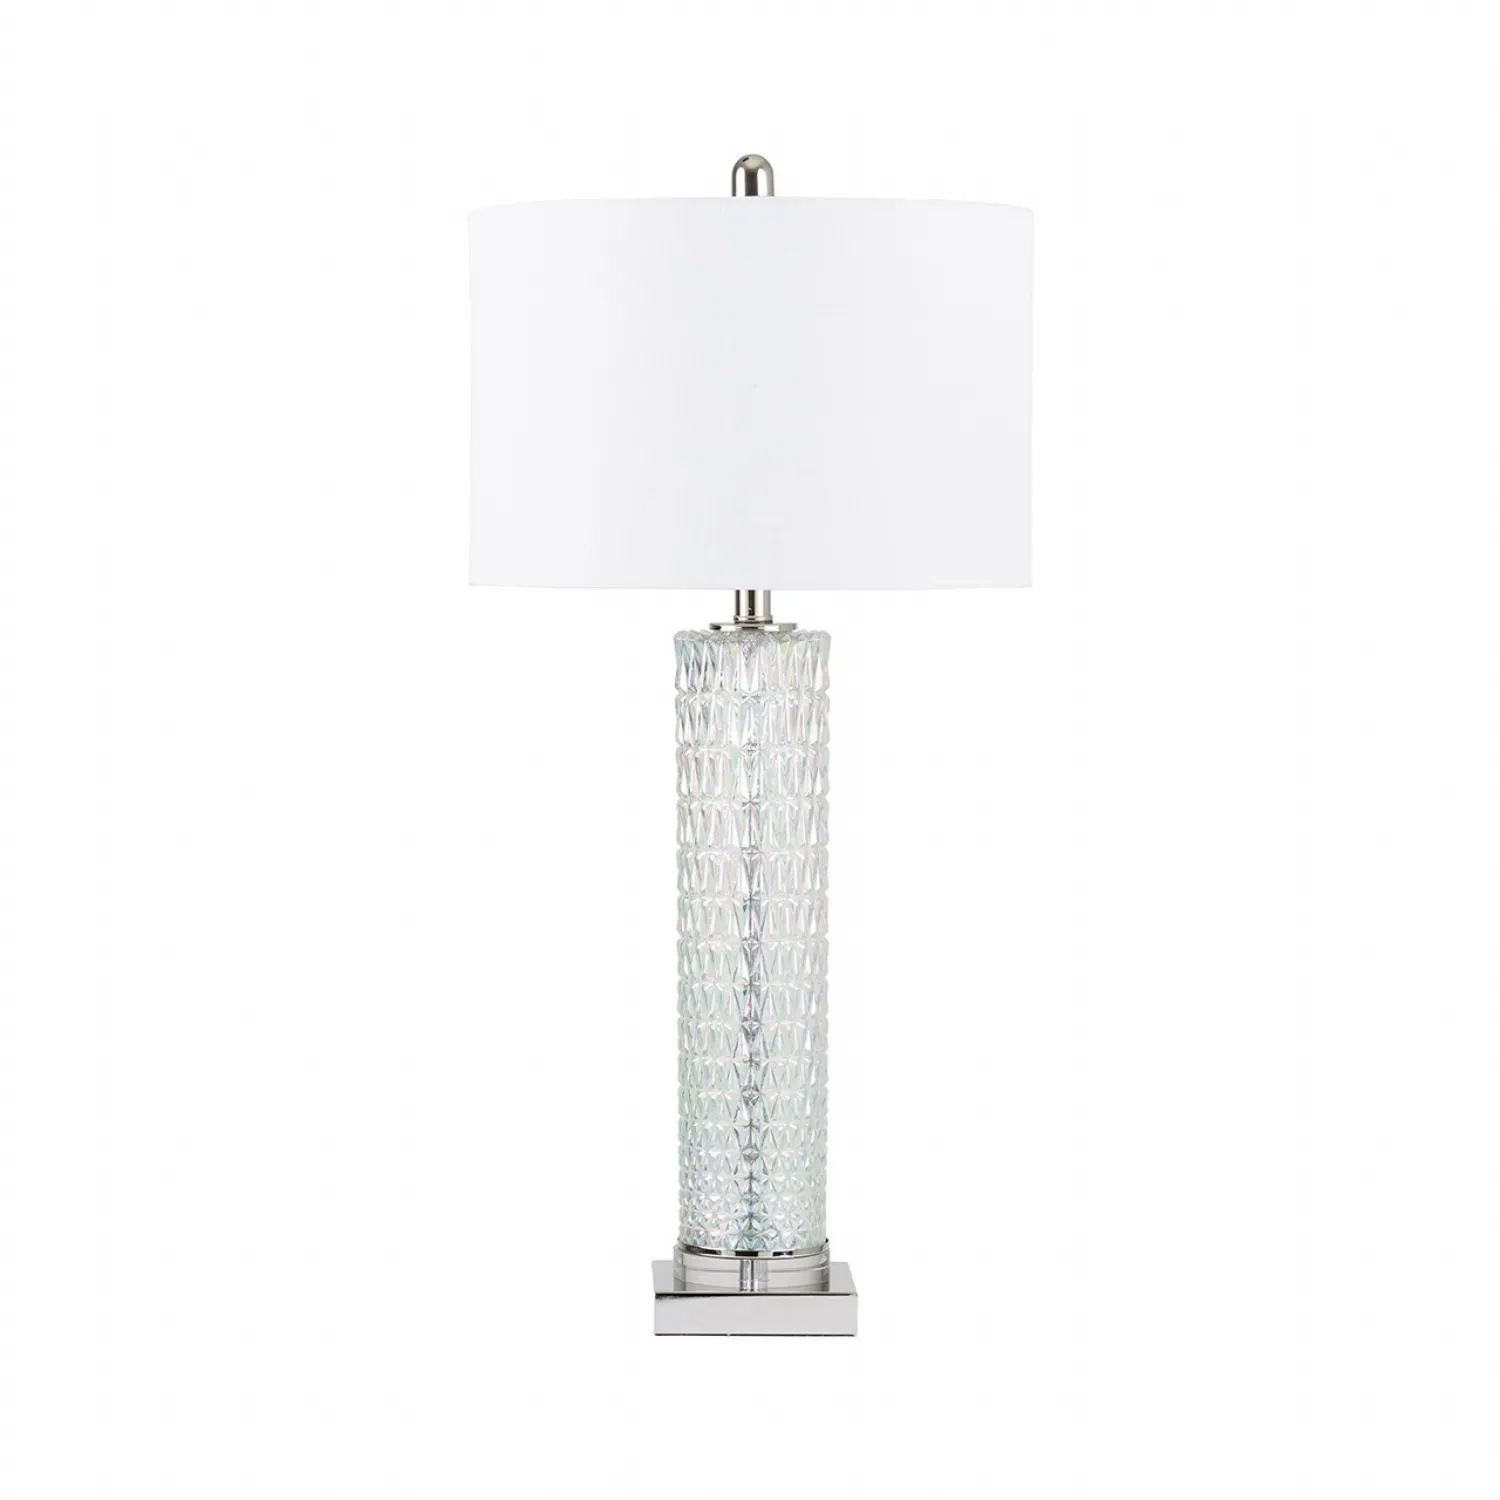 78. 7cm Clear Glass Table Lamp With White Linen Shade